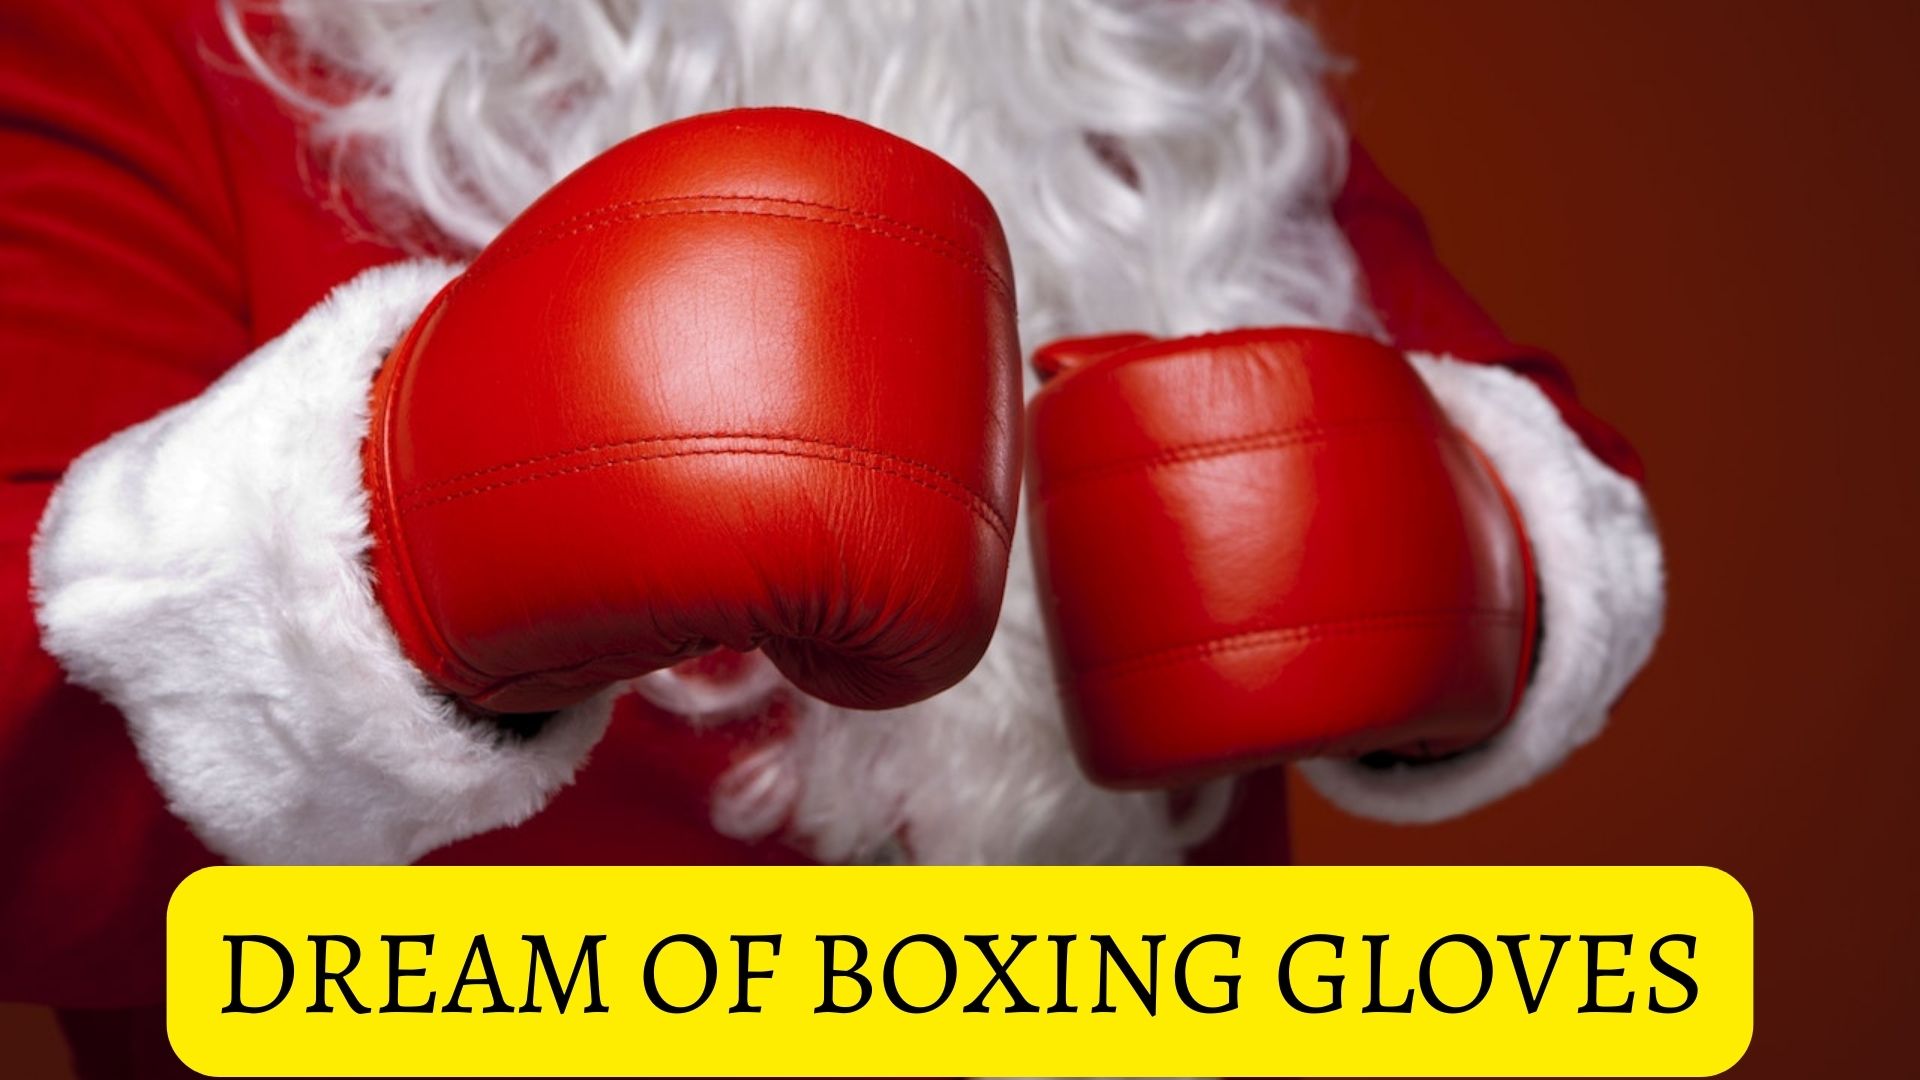 Dream Of Boxing Gloves - Personal Development And Growth